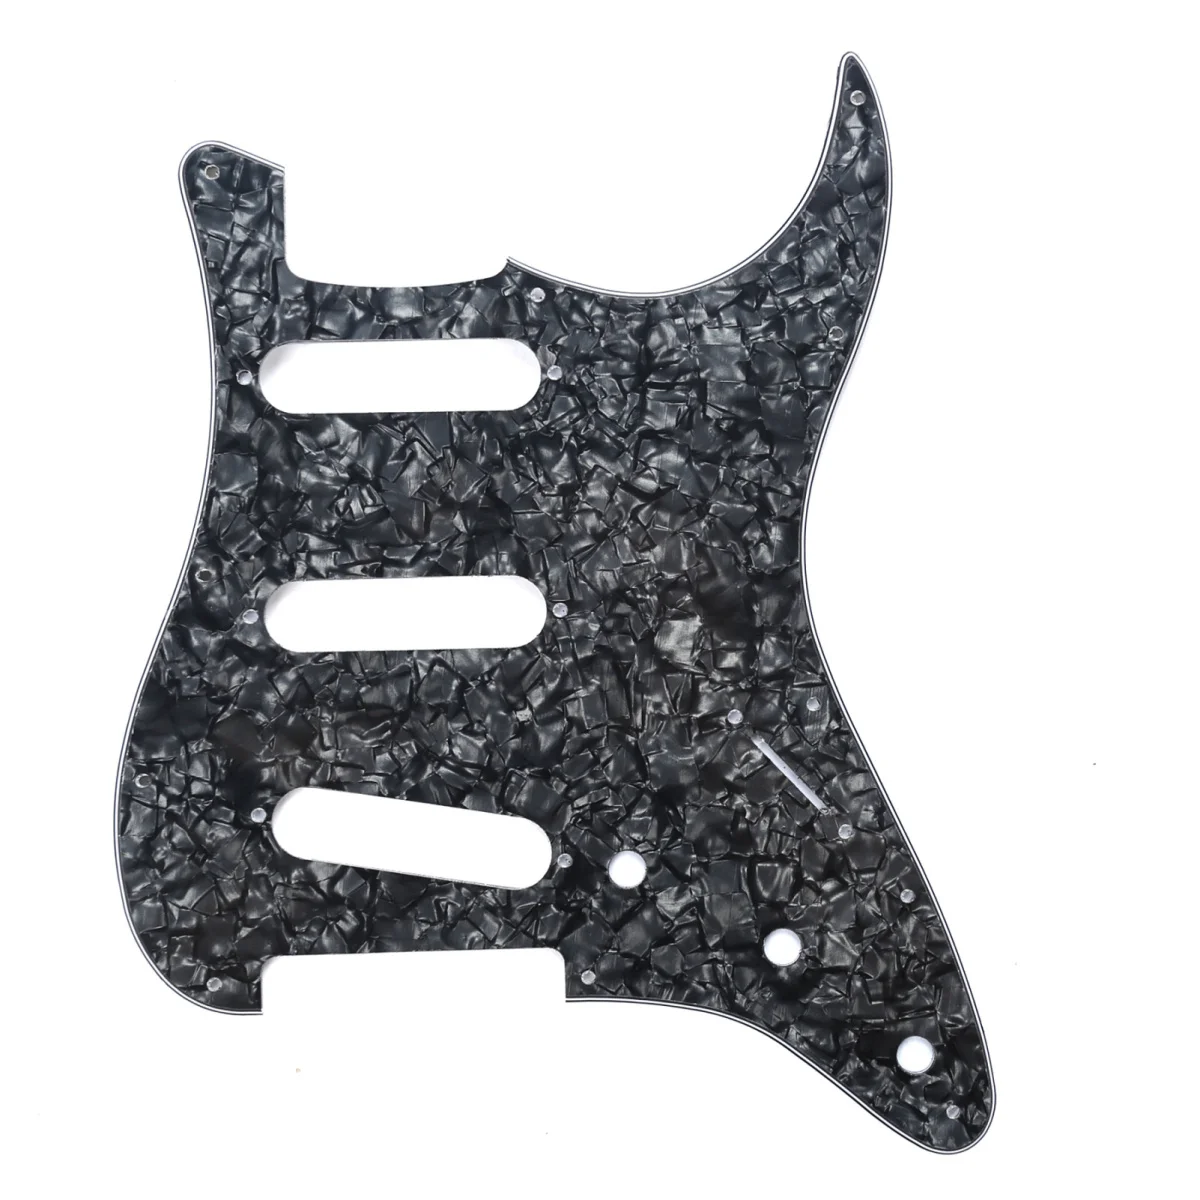 

Musiclily SSS 11 Hole Strat Guitar Pickguard for Fender USA/Mexican Made Standard Stratocaster Style, 4Ply Black Pearl